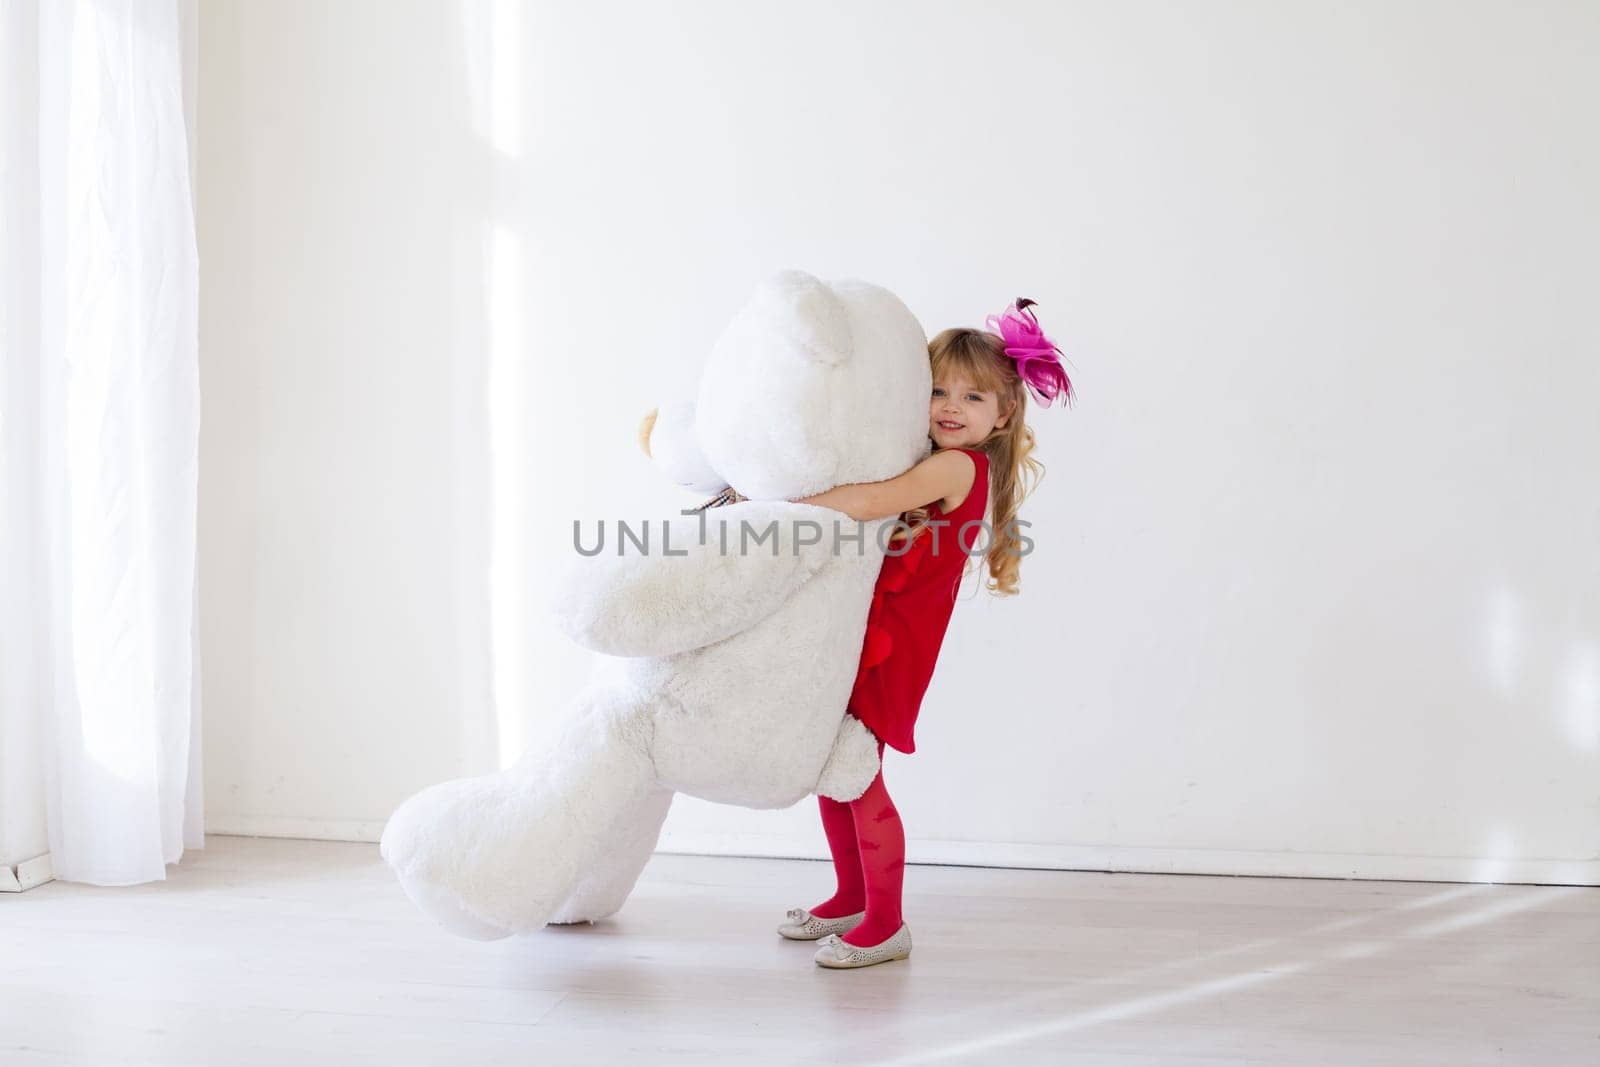 girl with toy teddy bear gift